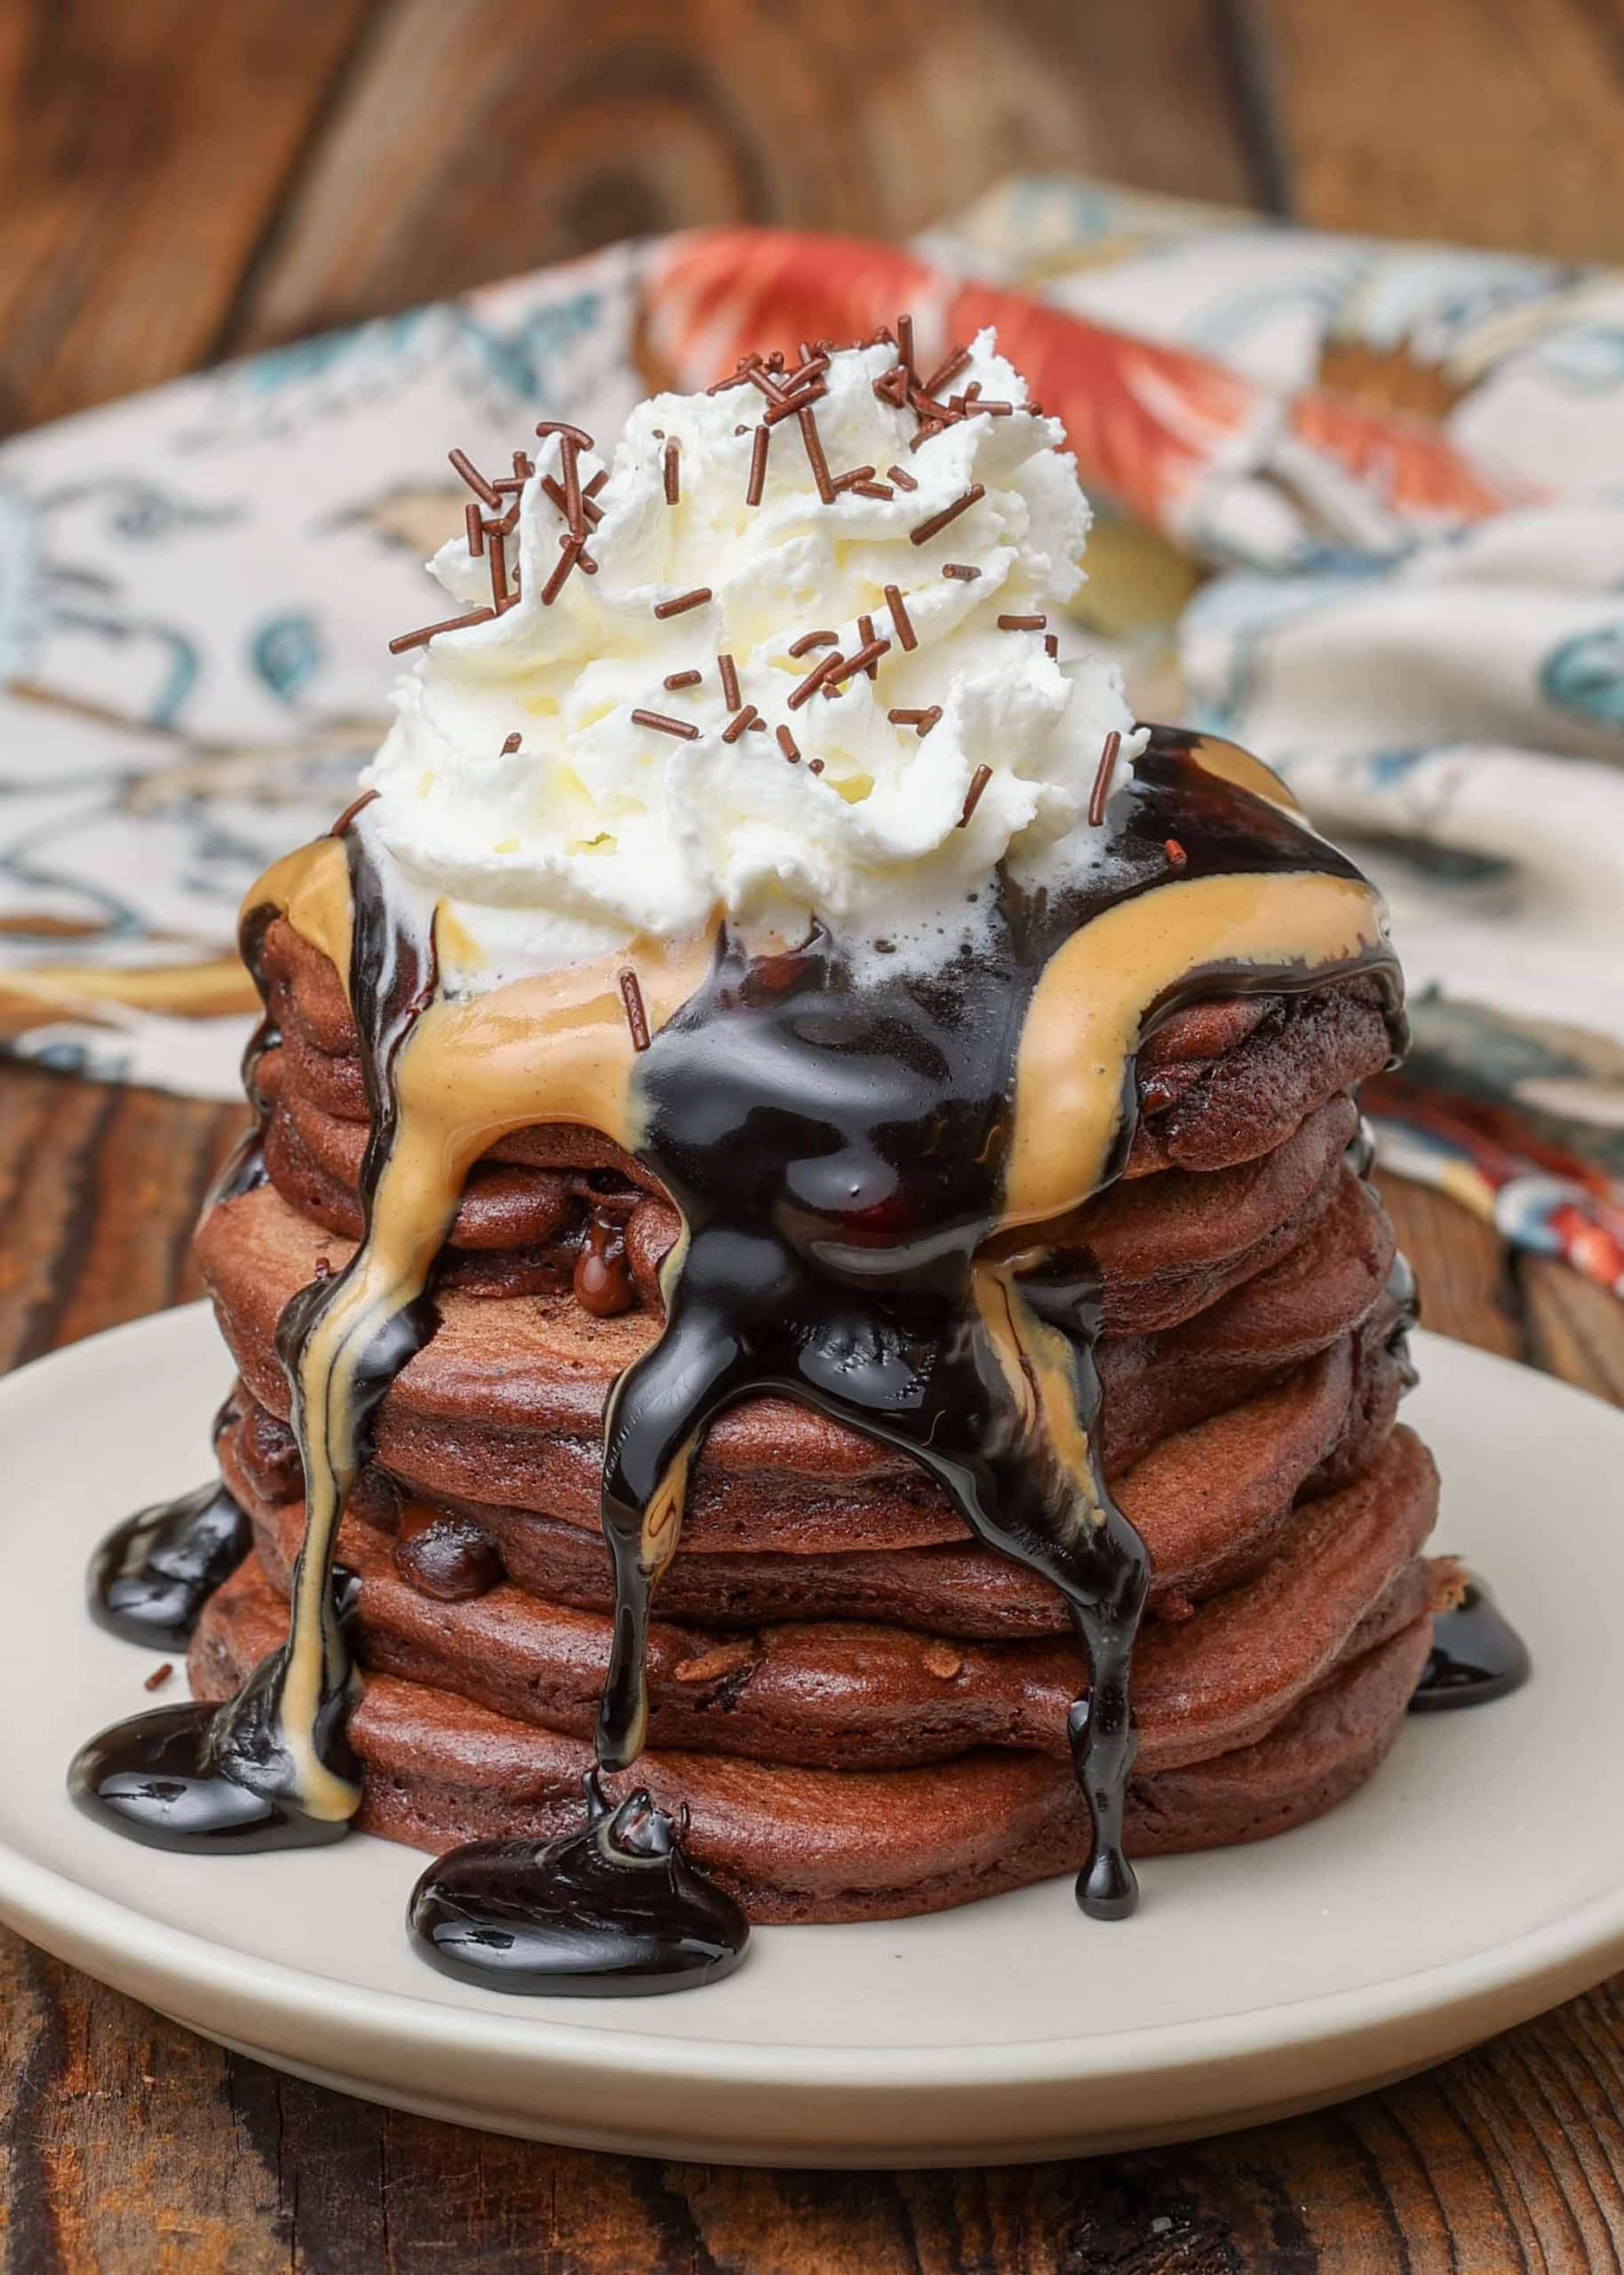 https://chocolatewithgrace.com/wp-content/uploads/2022/12/Chocolate-Pancakes-CWG-4-1-of-1-scaled.jpg